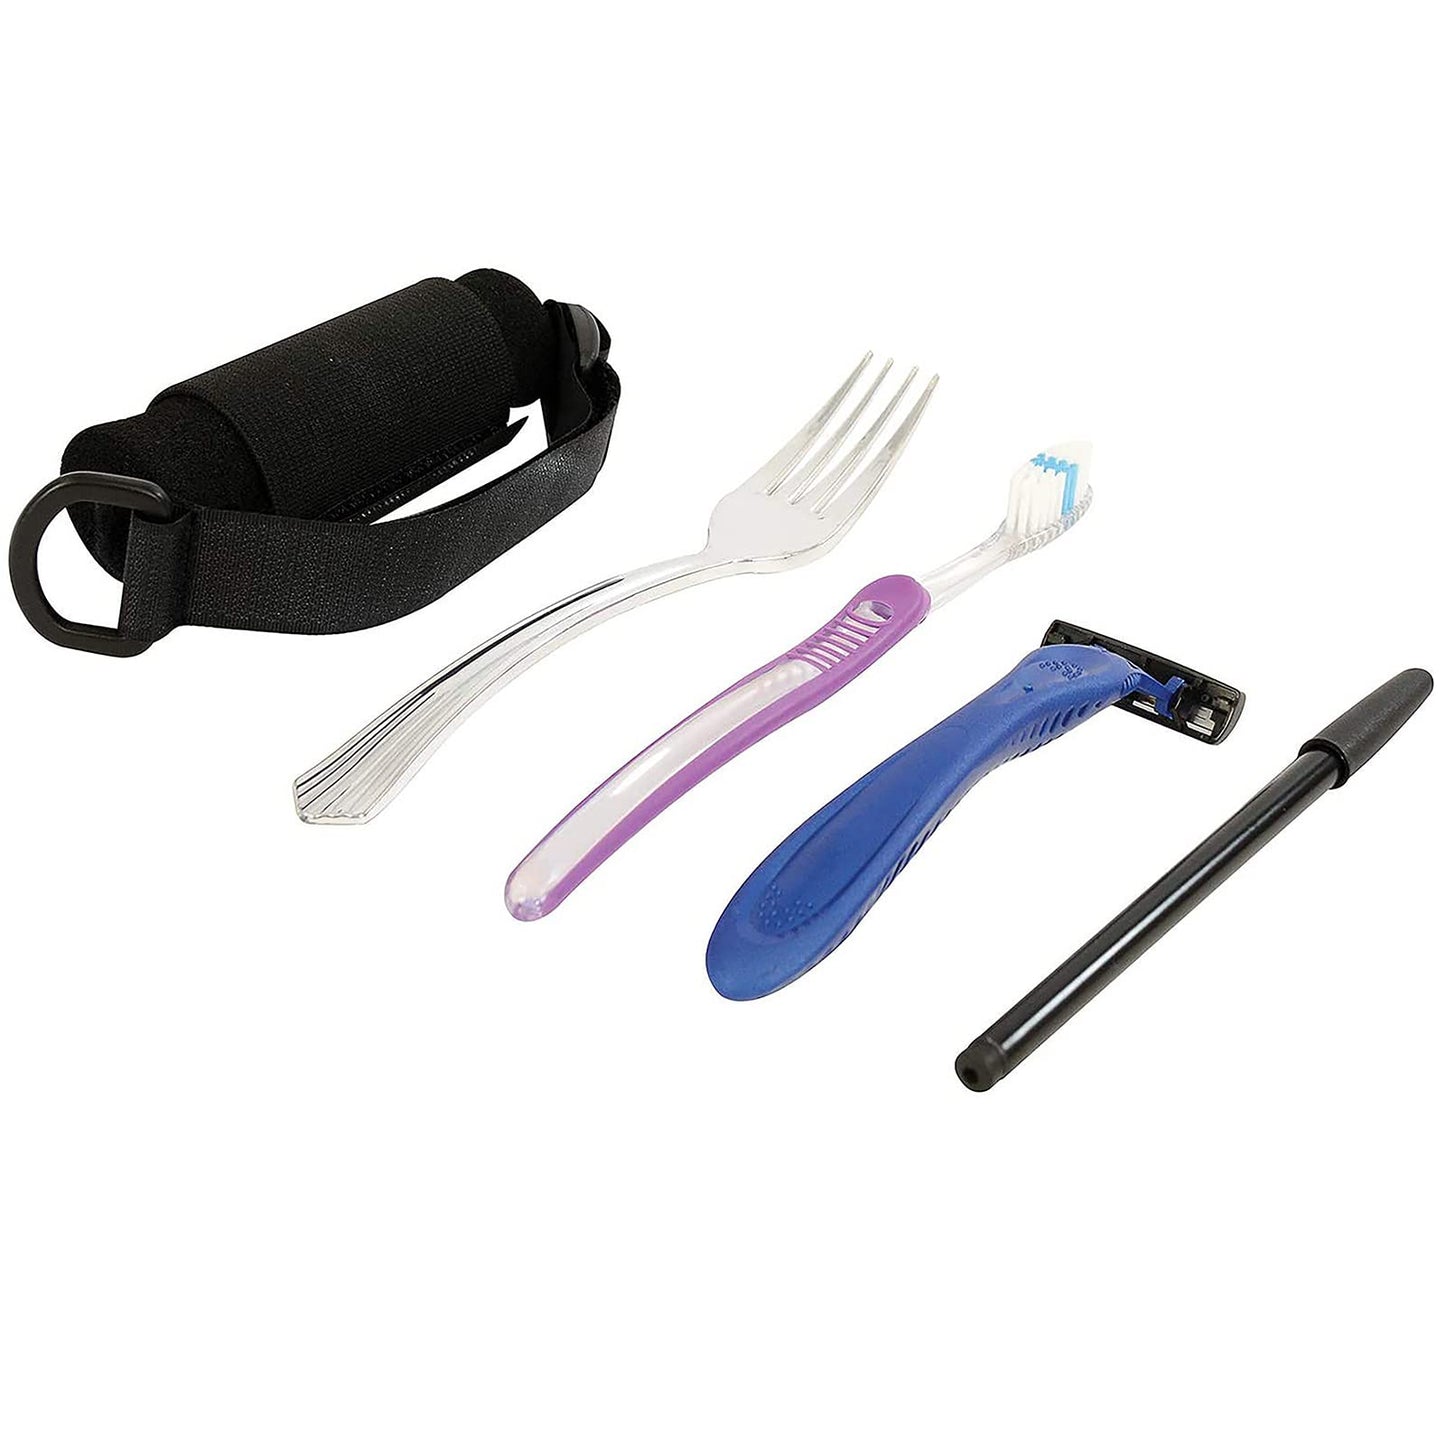 Disabled Eating Aids Utensil Holders Eating Assistance Hand Cuff for Holding Spoon, Fork, Cutlery Adjustable Nylon Gripping Strap for Limited Mobility, Weak Grip, Muscle Weakness, Elder, Handicapped